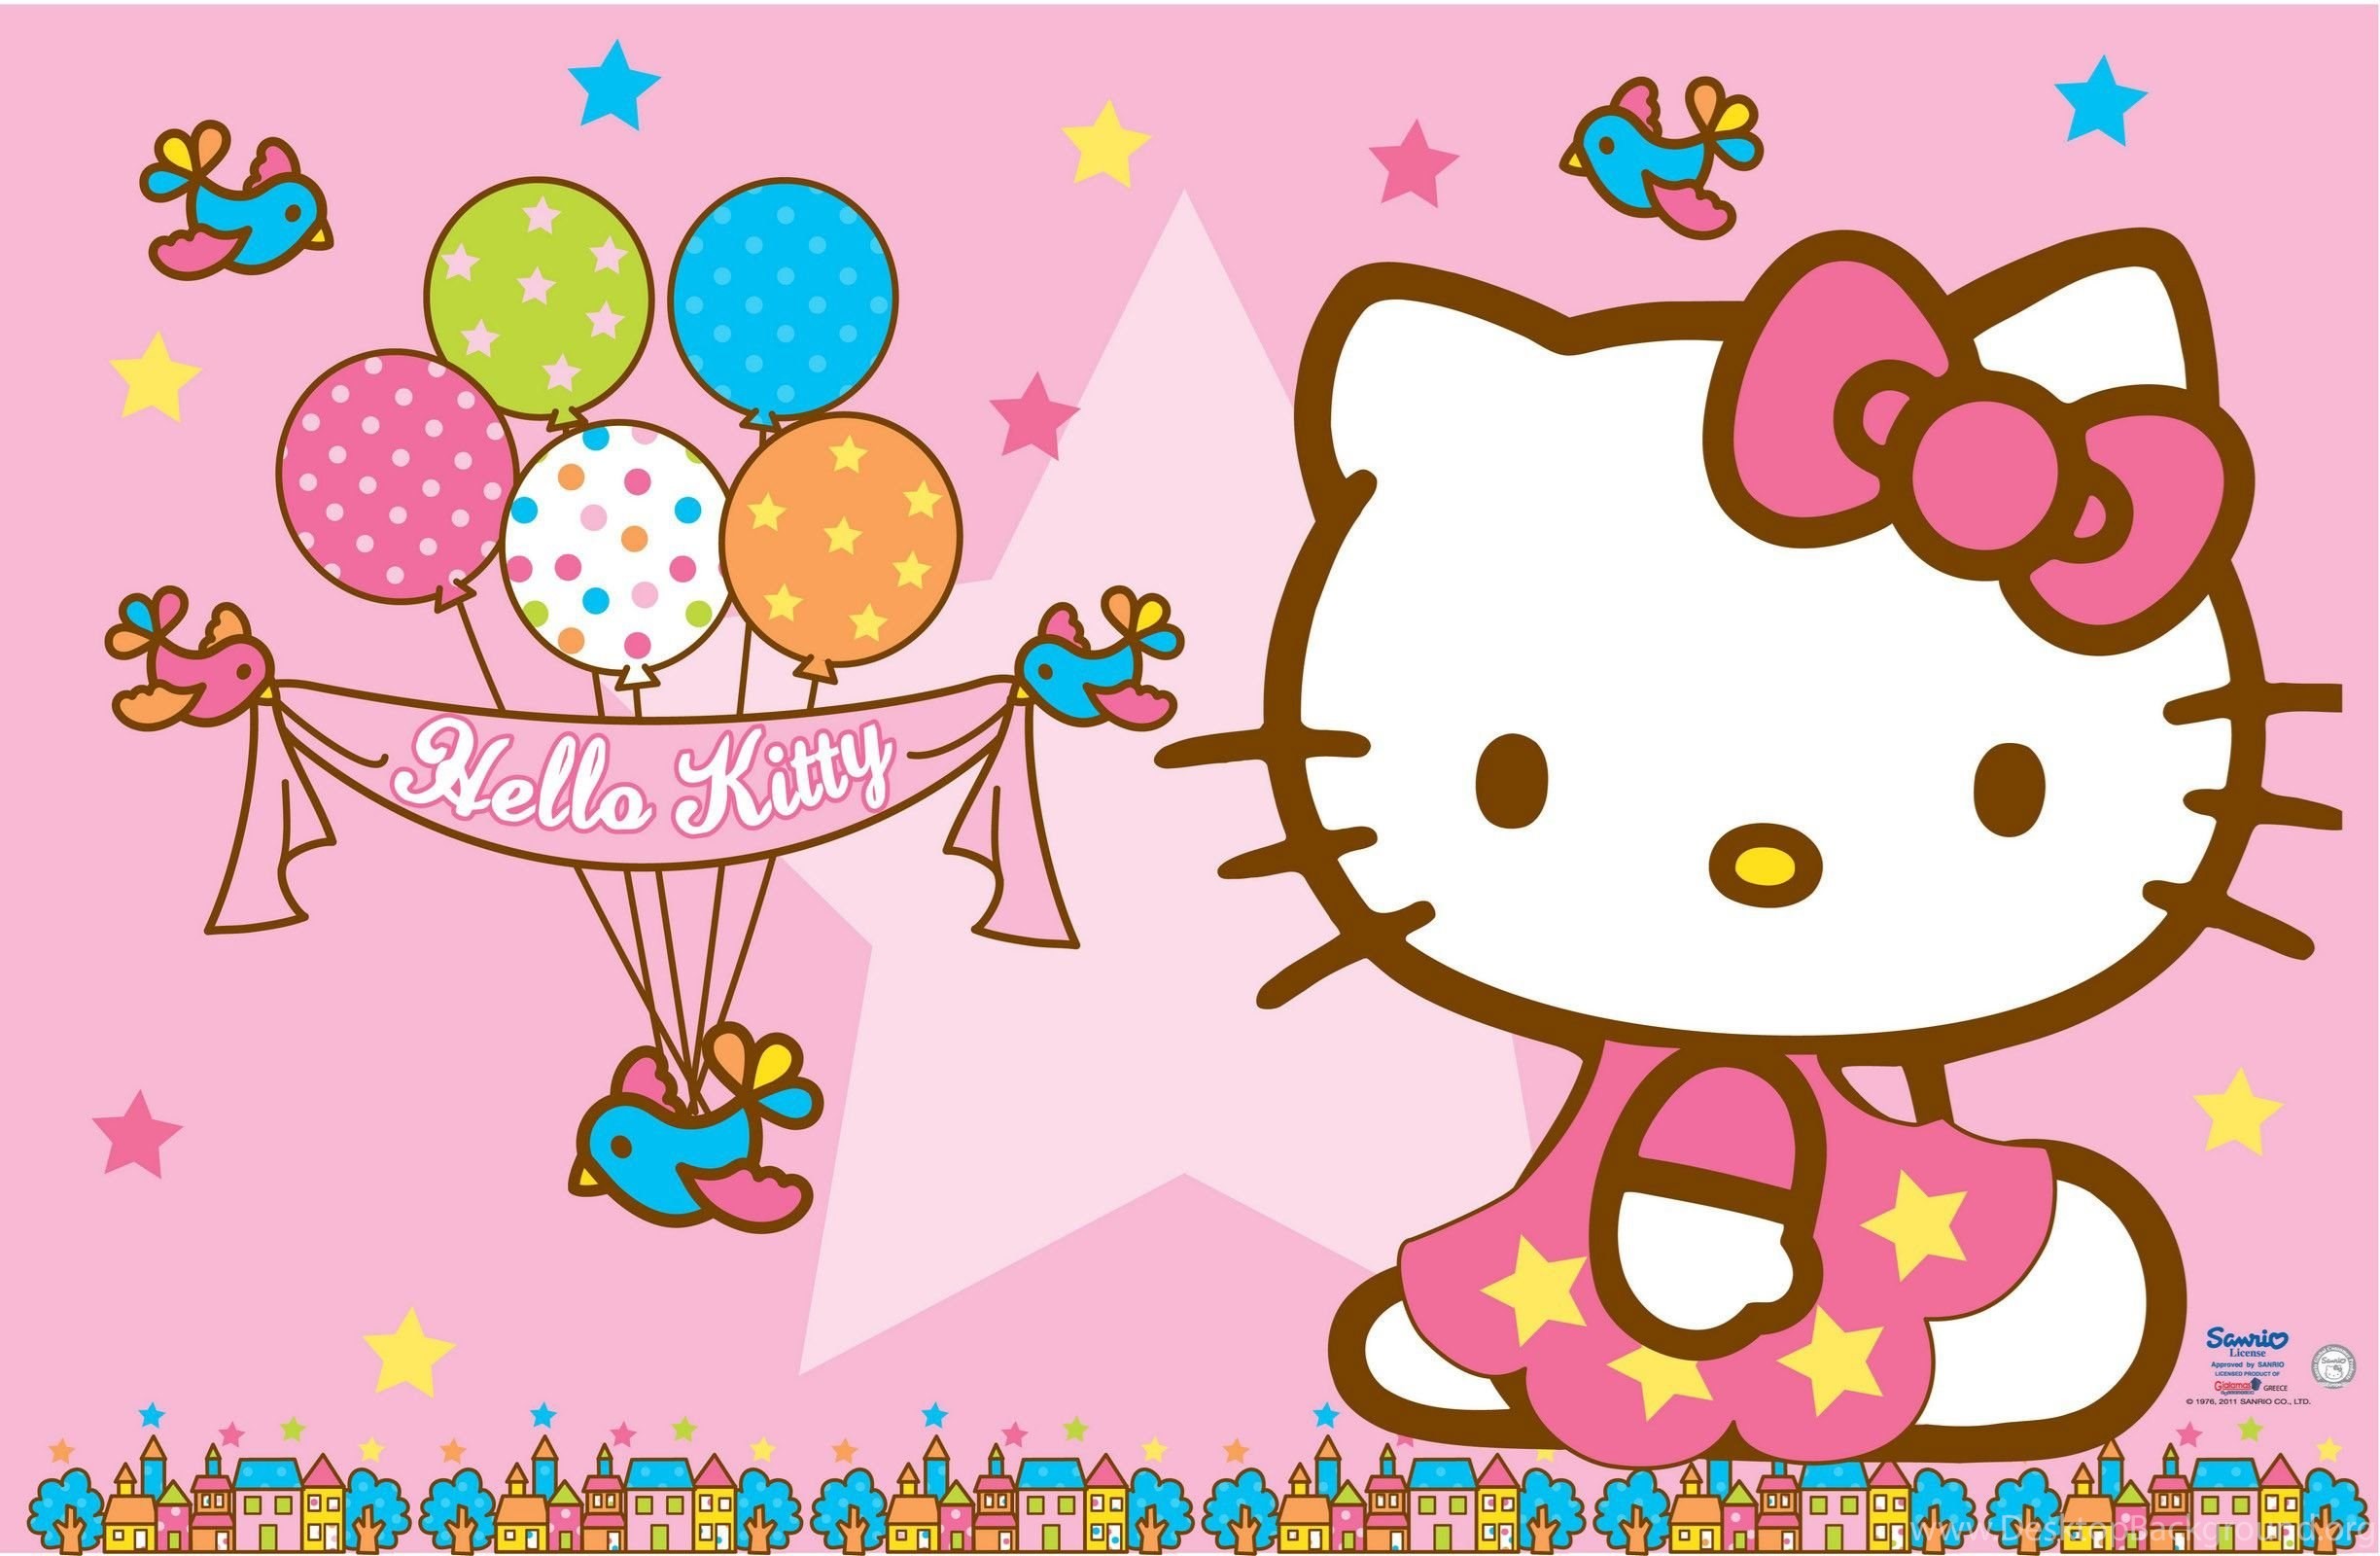 2448x1600 Hello Kitty Wallpapers Pink Backgrounds And Balloons For Birthday .